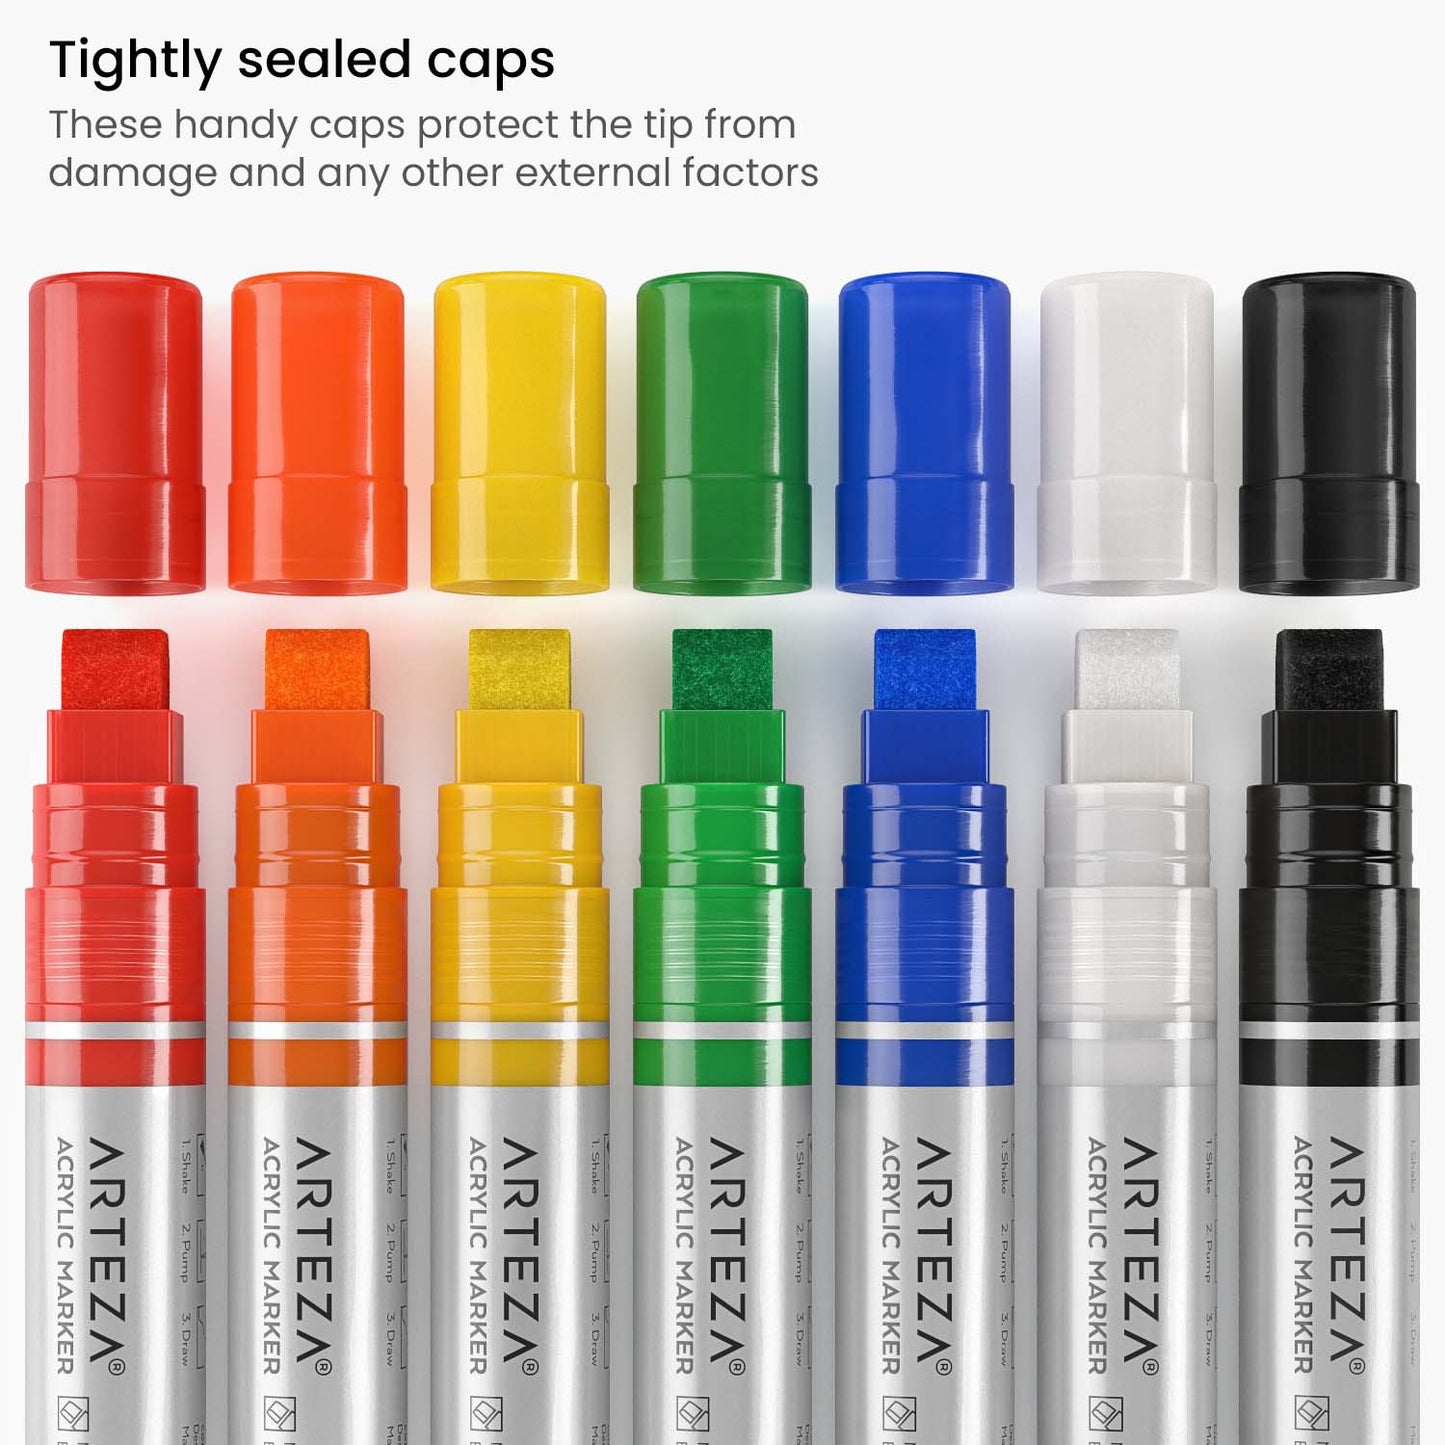 Arteza Acrylic Paint Markers, Set of 40 Colors, Long Lasting Acrylic for  Sale in Salinas, CA - OfferUp